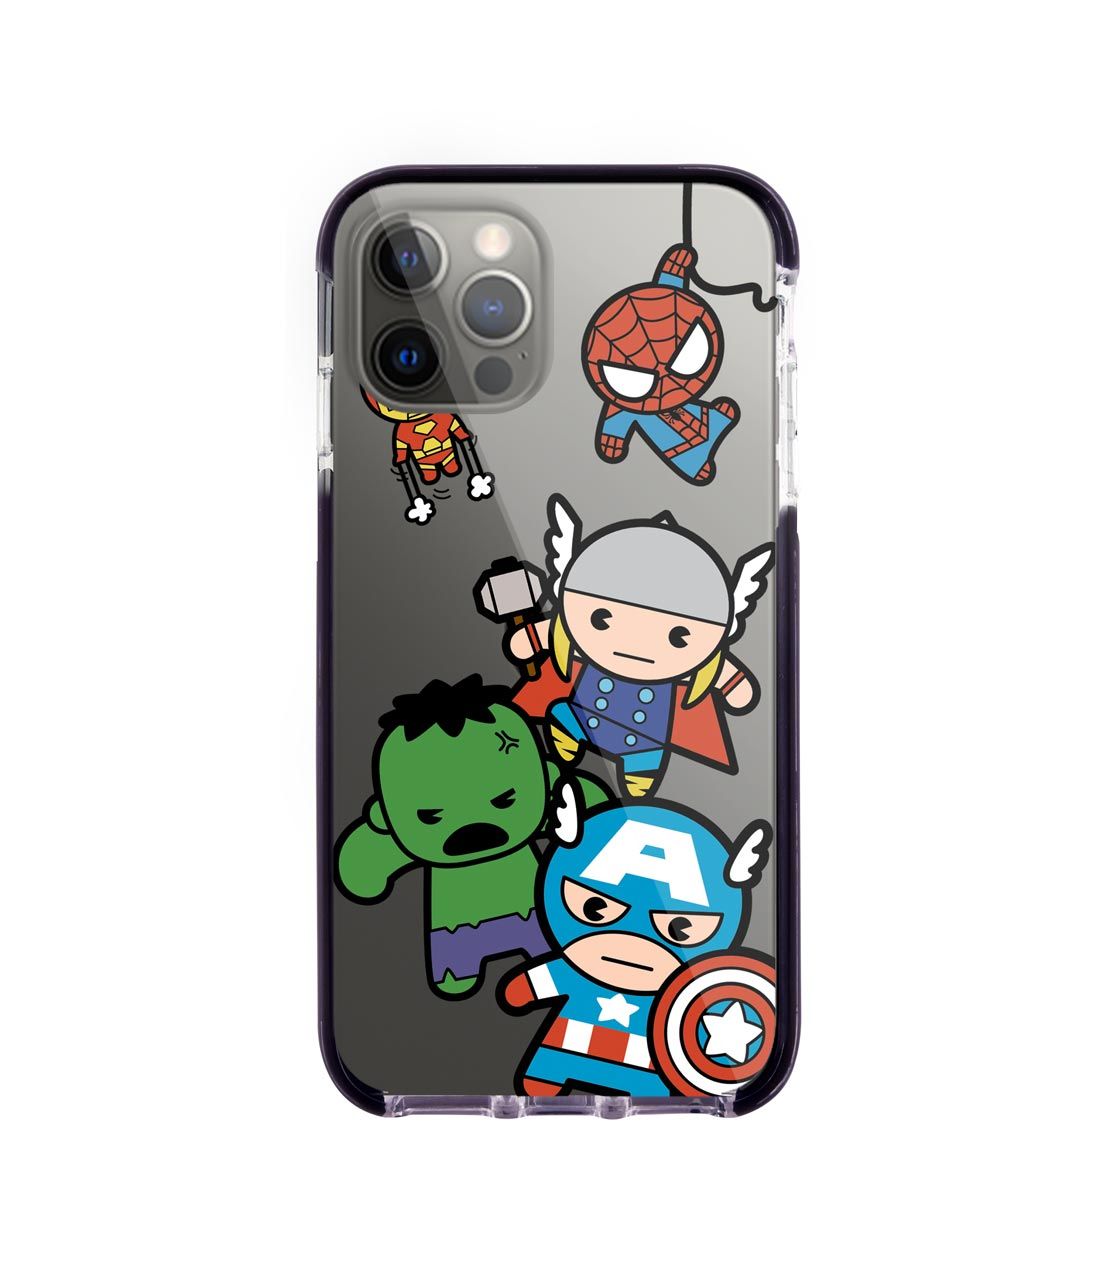 Kawaii Art Marvel Comics - Extreme Case for iPhone 12 Pro Max